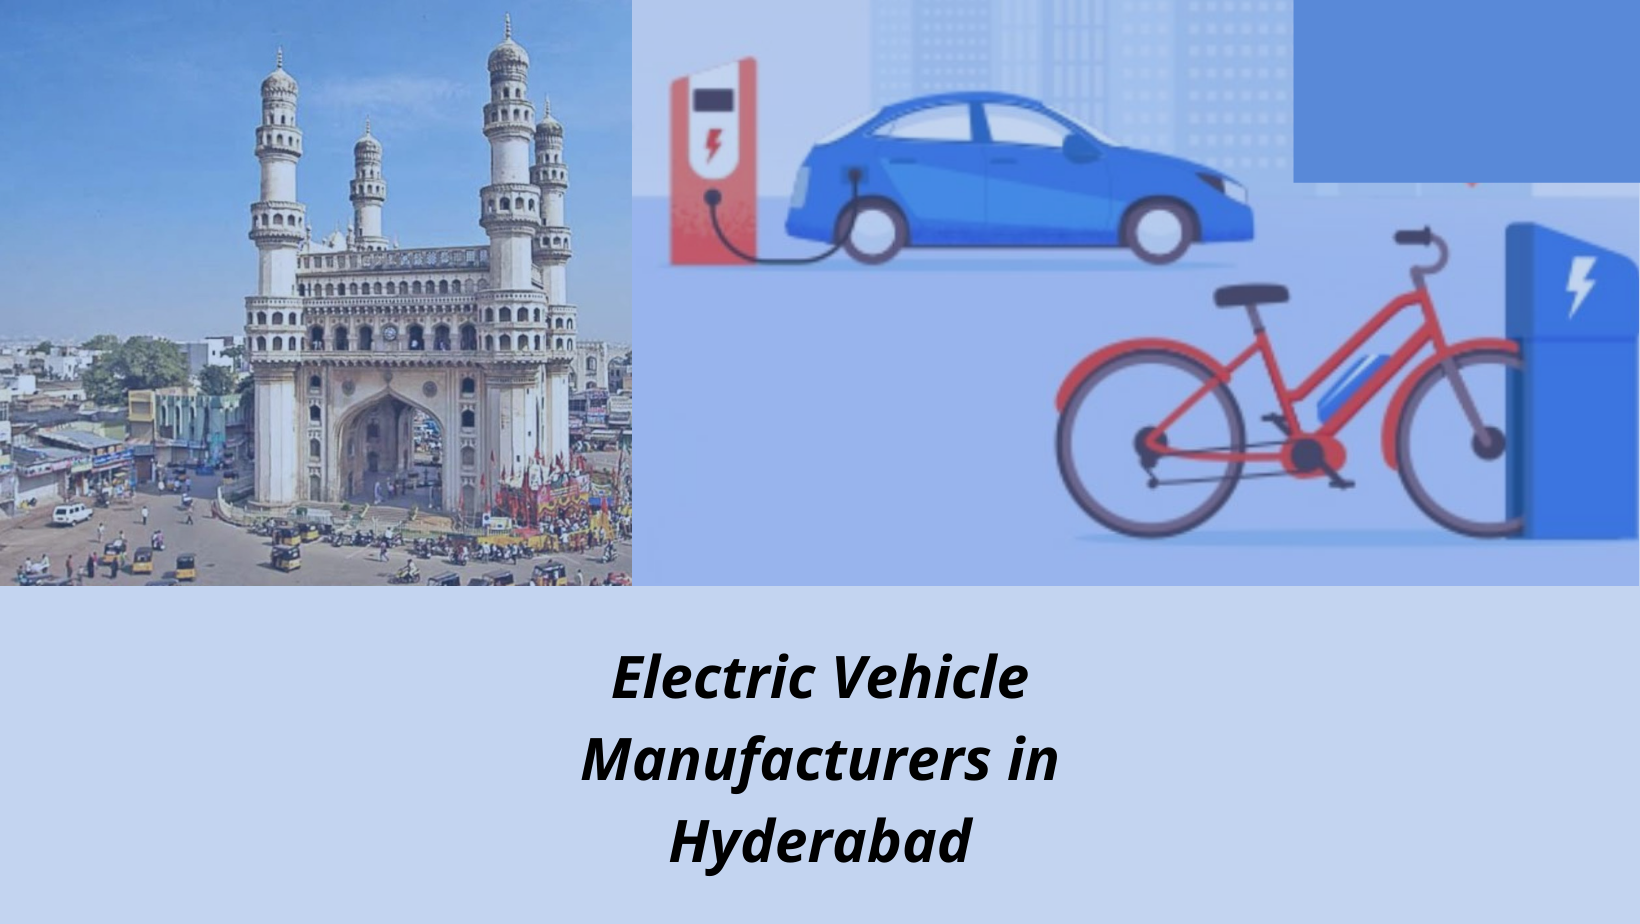 Electric Vehicle manufacturers in Hyderabad